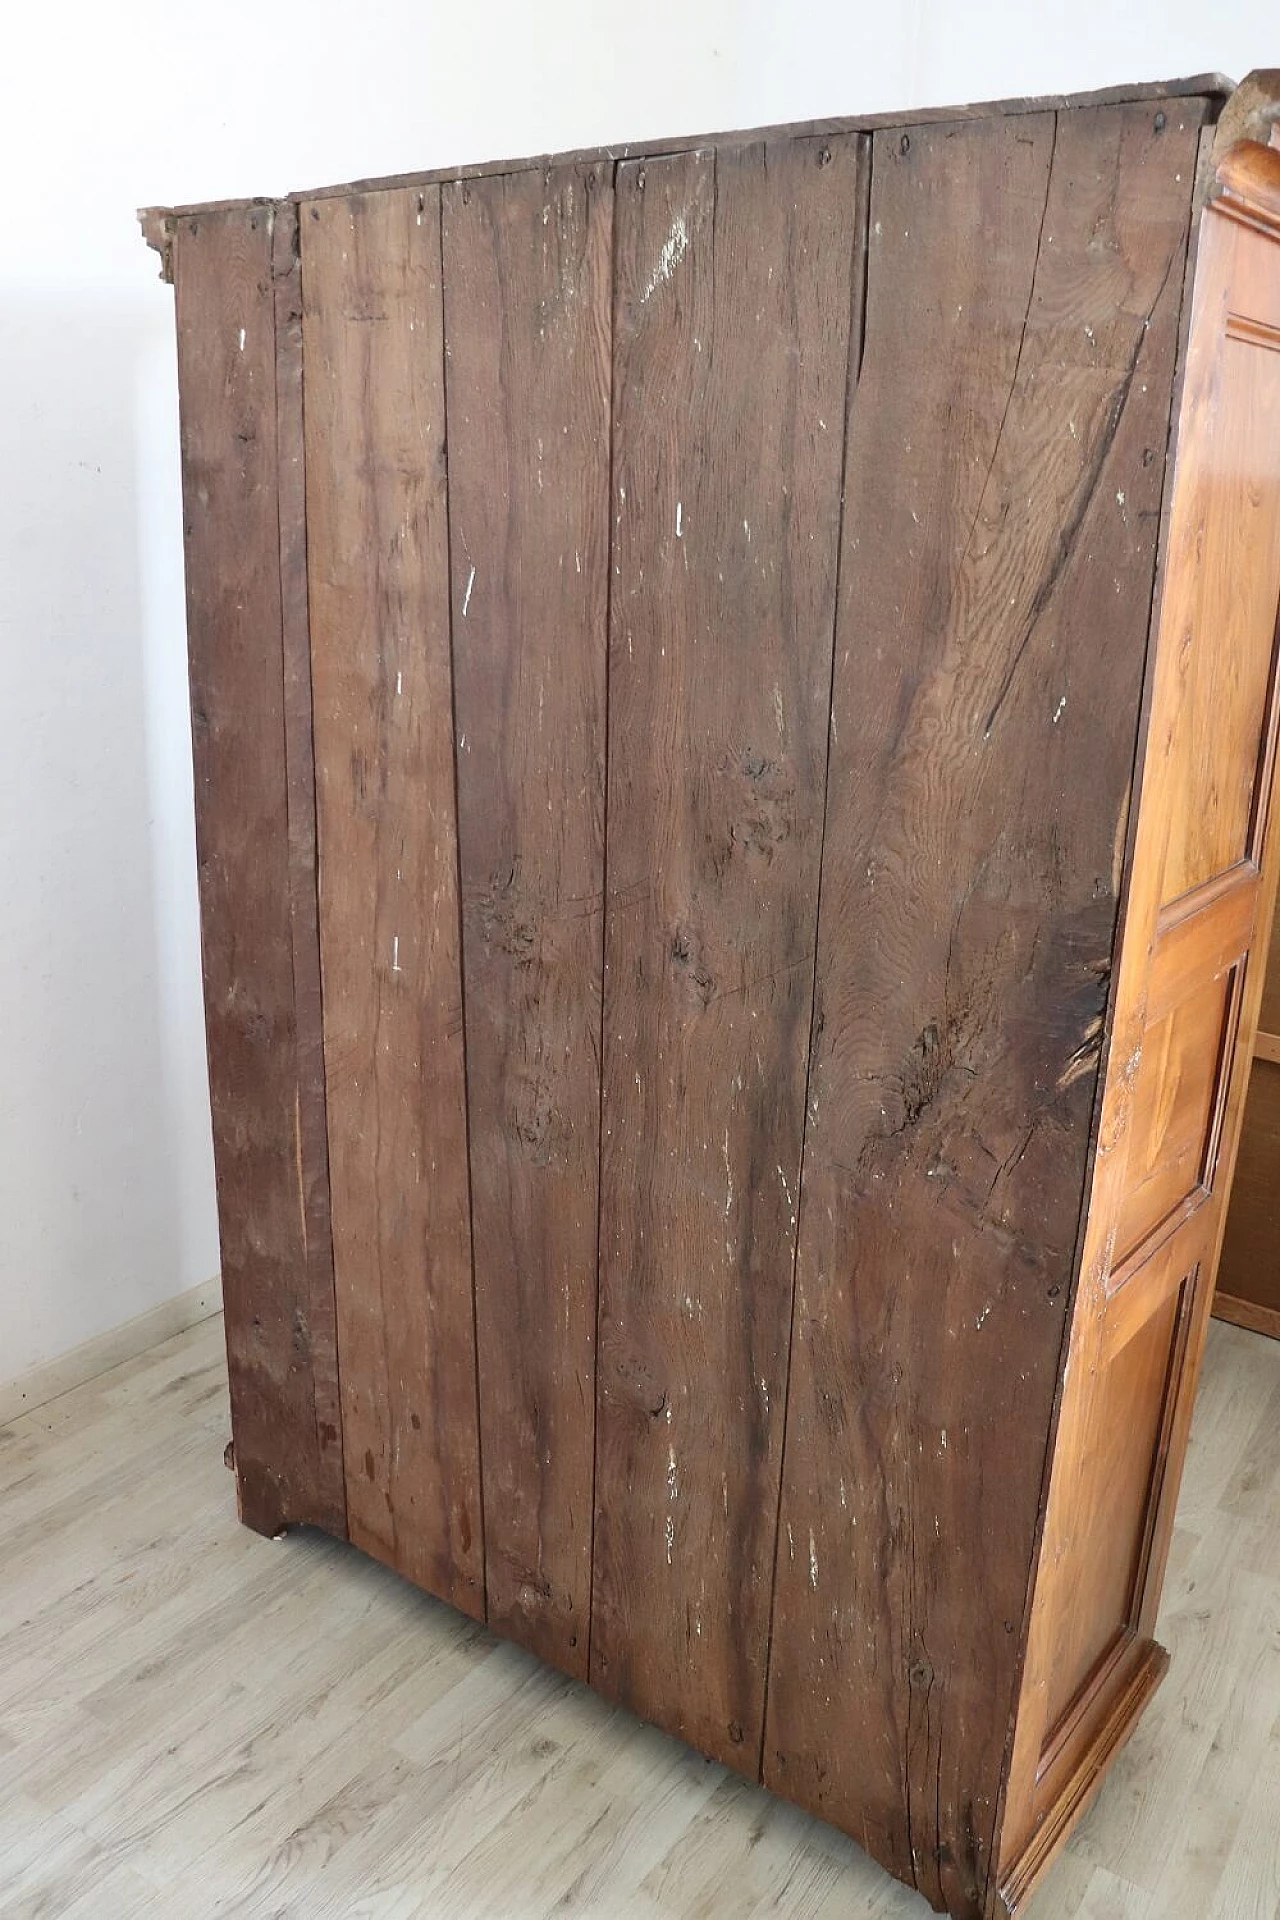 Solid walnut wardrobe with two doors, mid-18th century 19